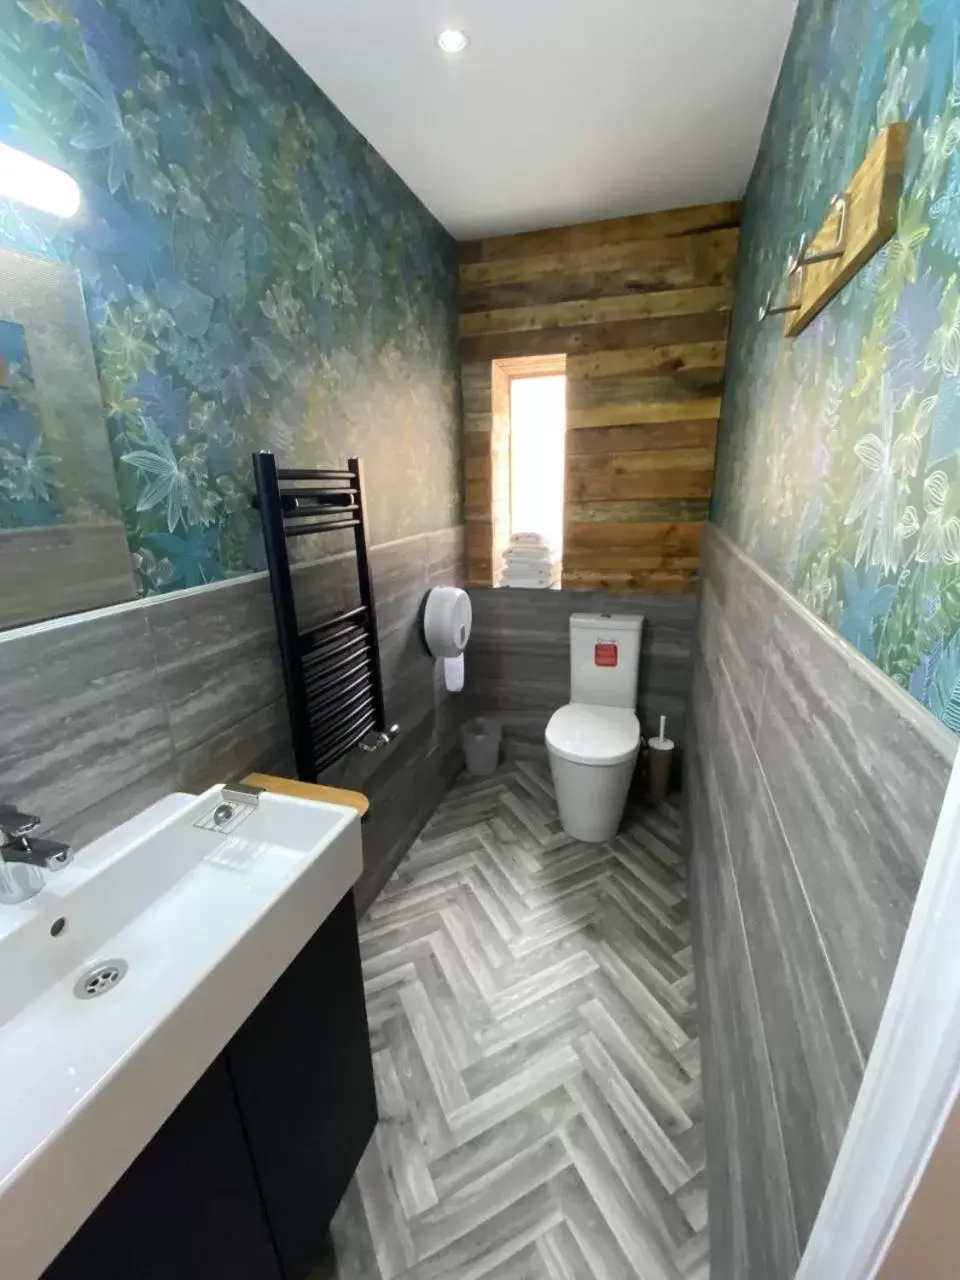 Bathroom in Astral Lodge